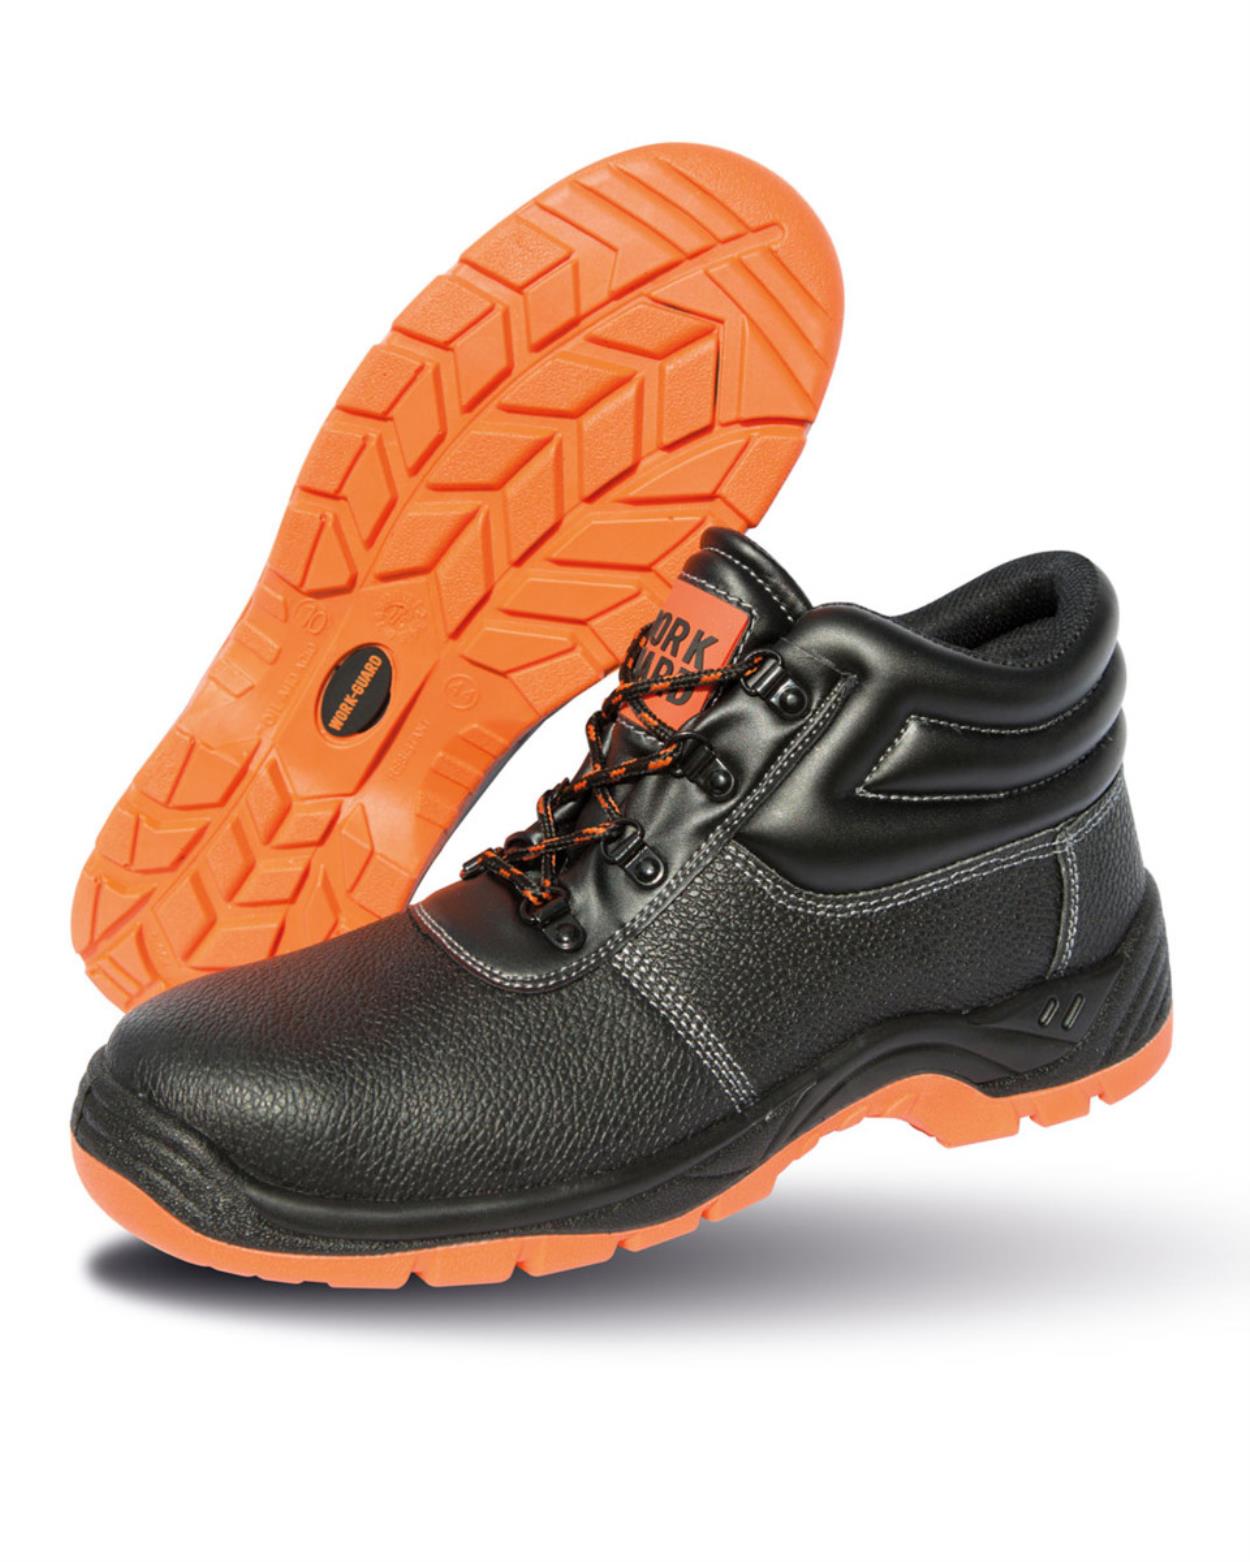 R340X Defence Safety Boot Image 1